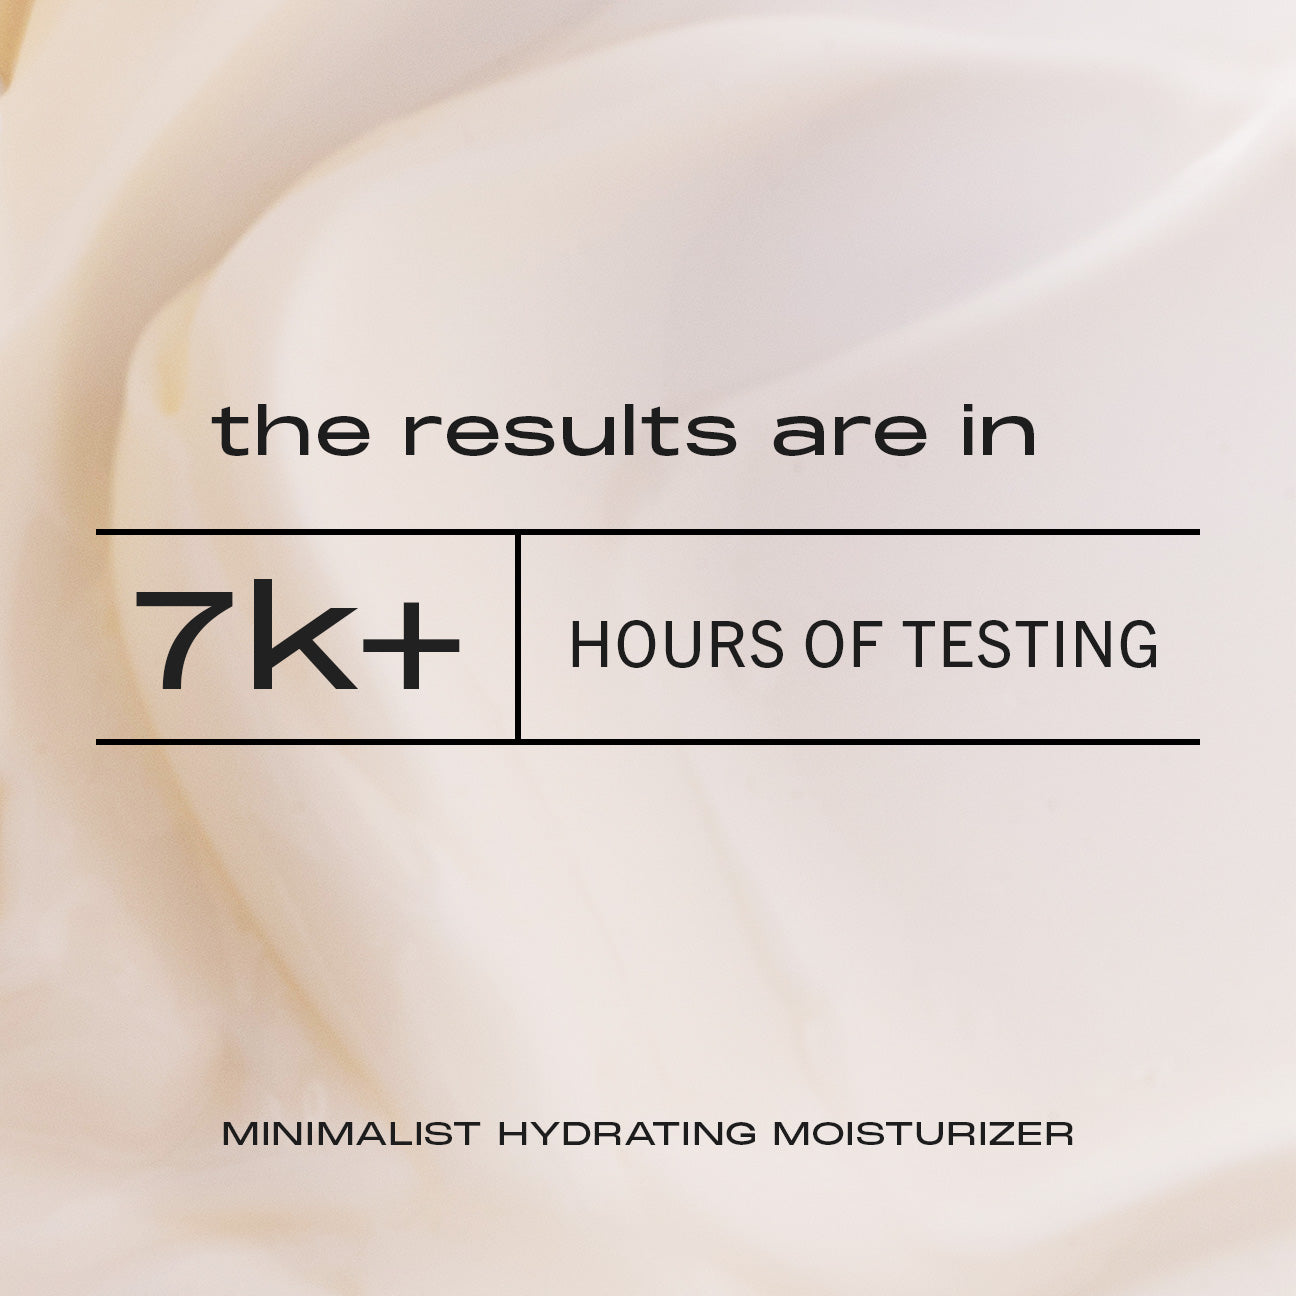 Image with text on top of product texture shot. Text says "the results are in. 7k+ hours of testing" for MATTER OF FACT product MINIMALIST HYDRATING MOISTURIZER